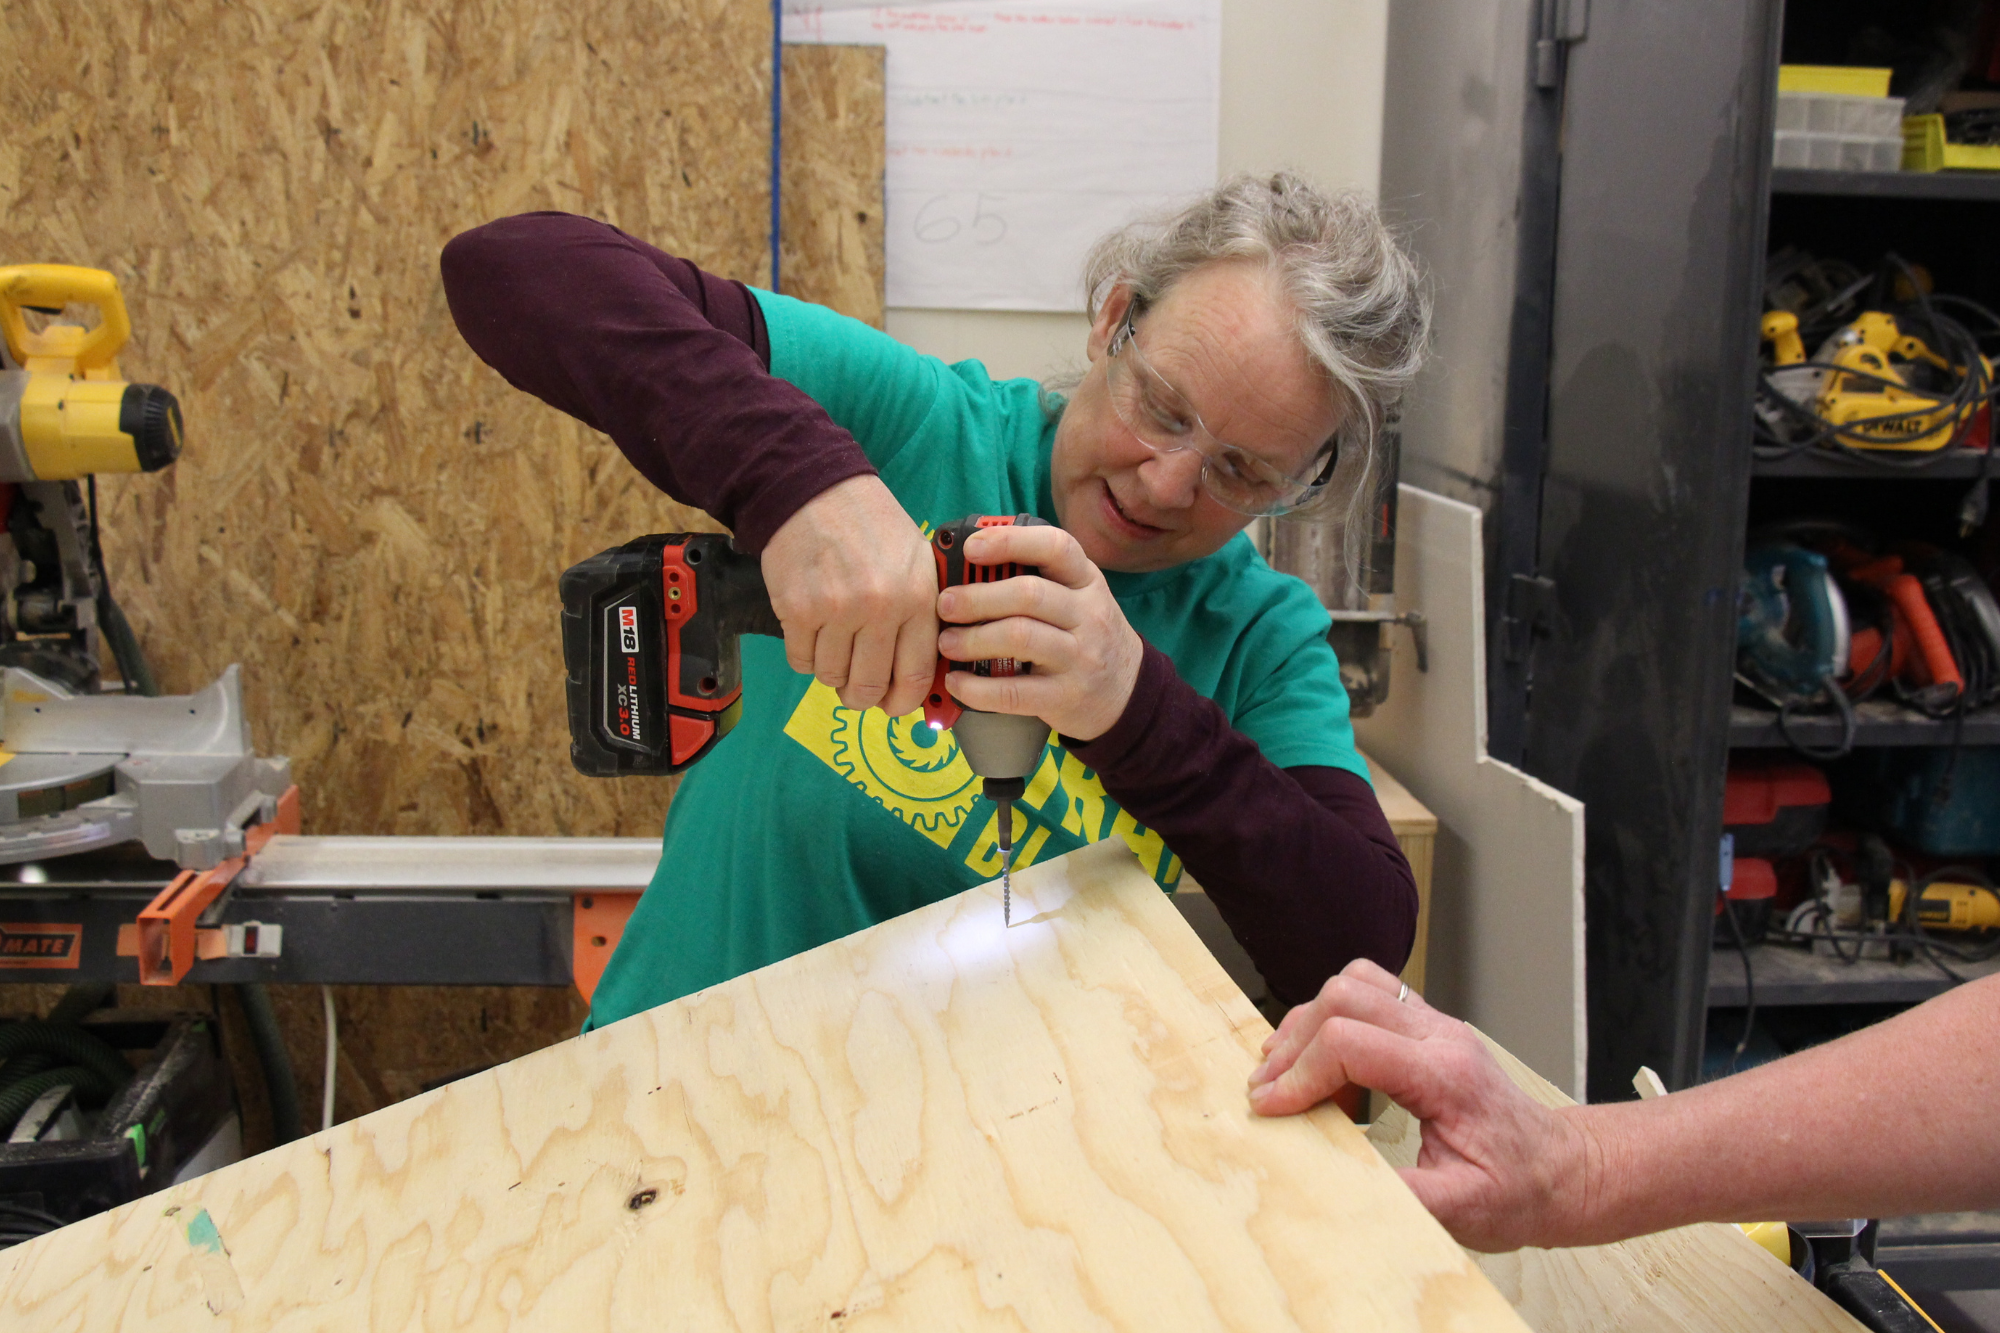 Trailblazers participant uses a cordless drill to screw plywood.